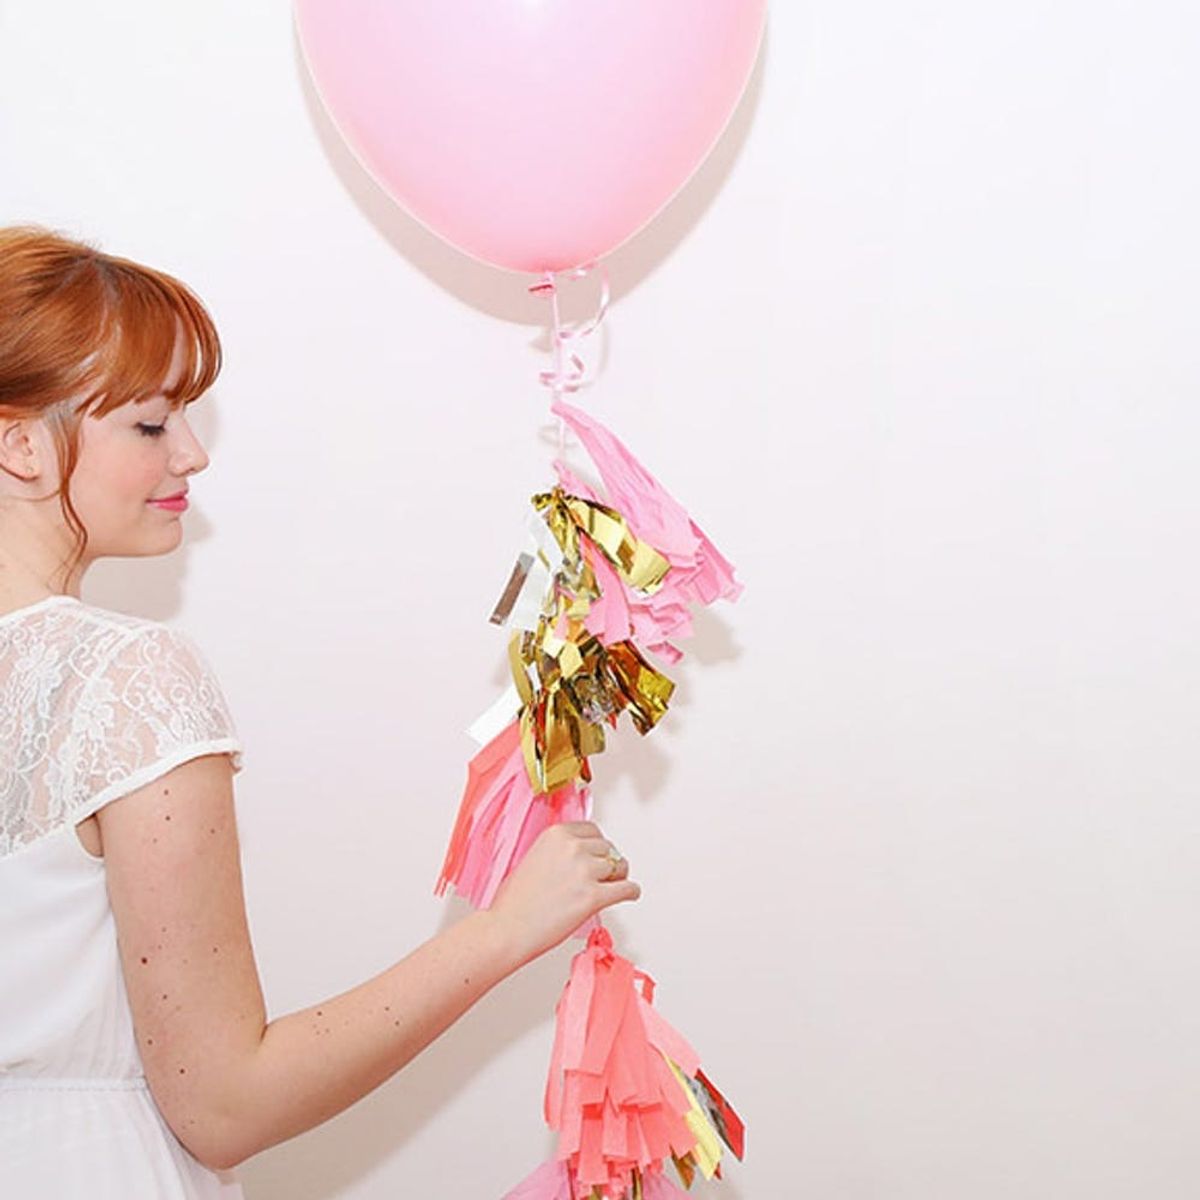 Make This Tassel Balloon for Your Wedding in 5 Minutes